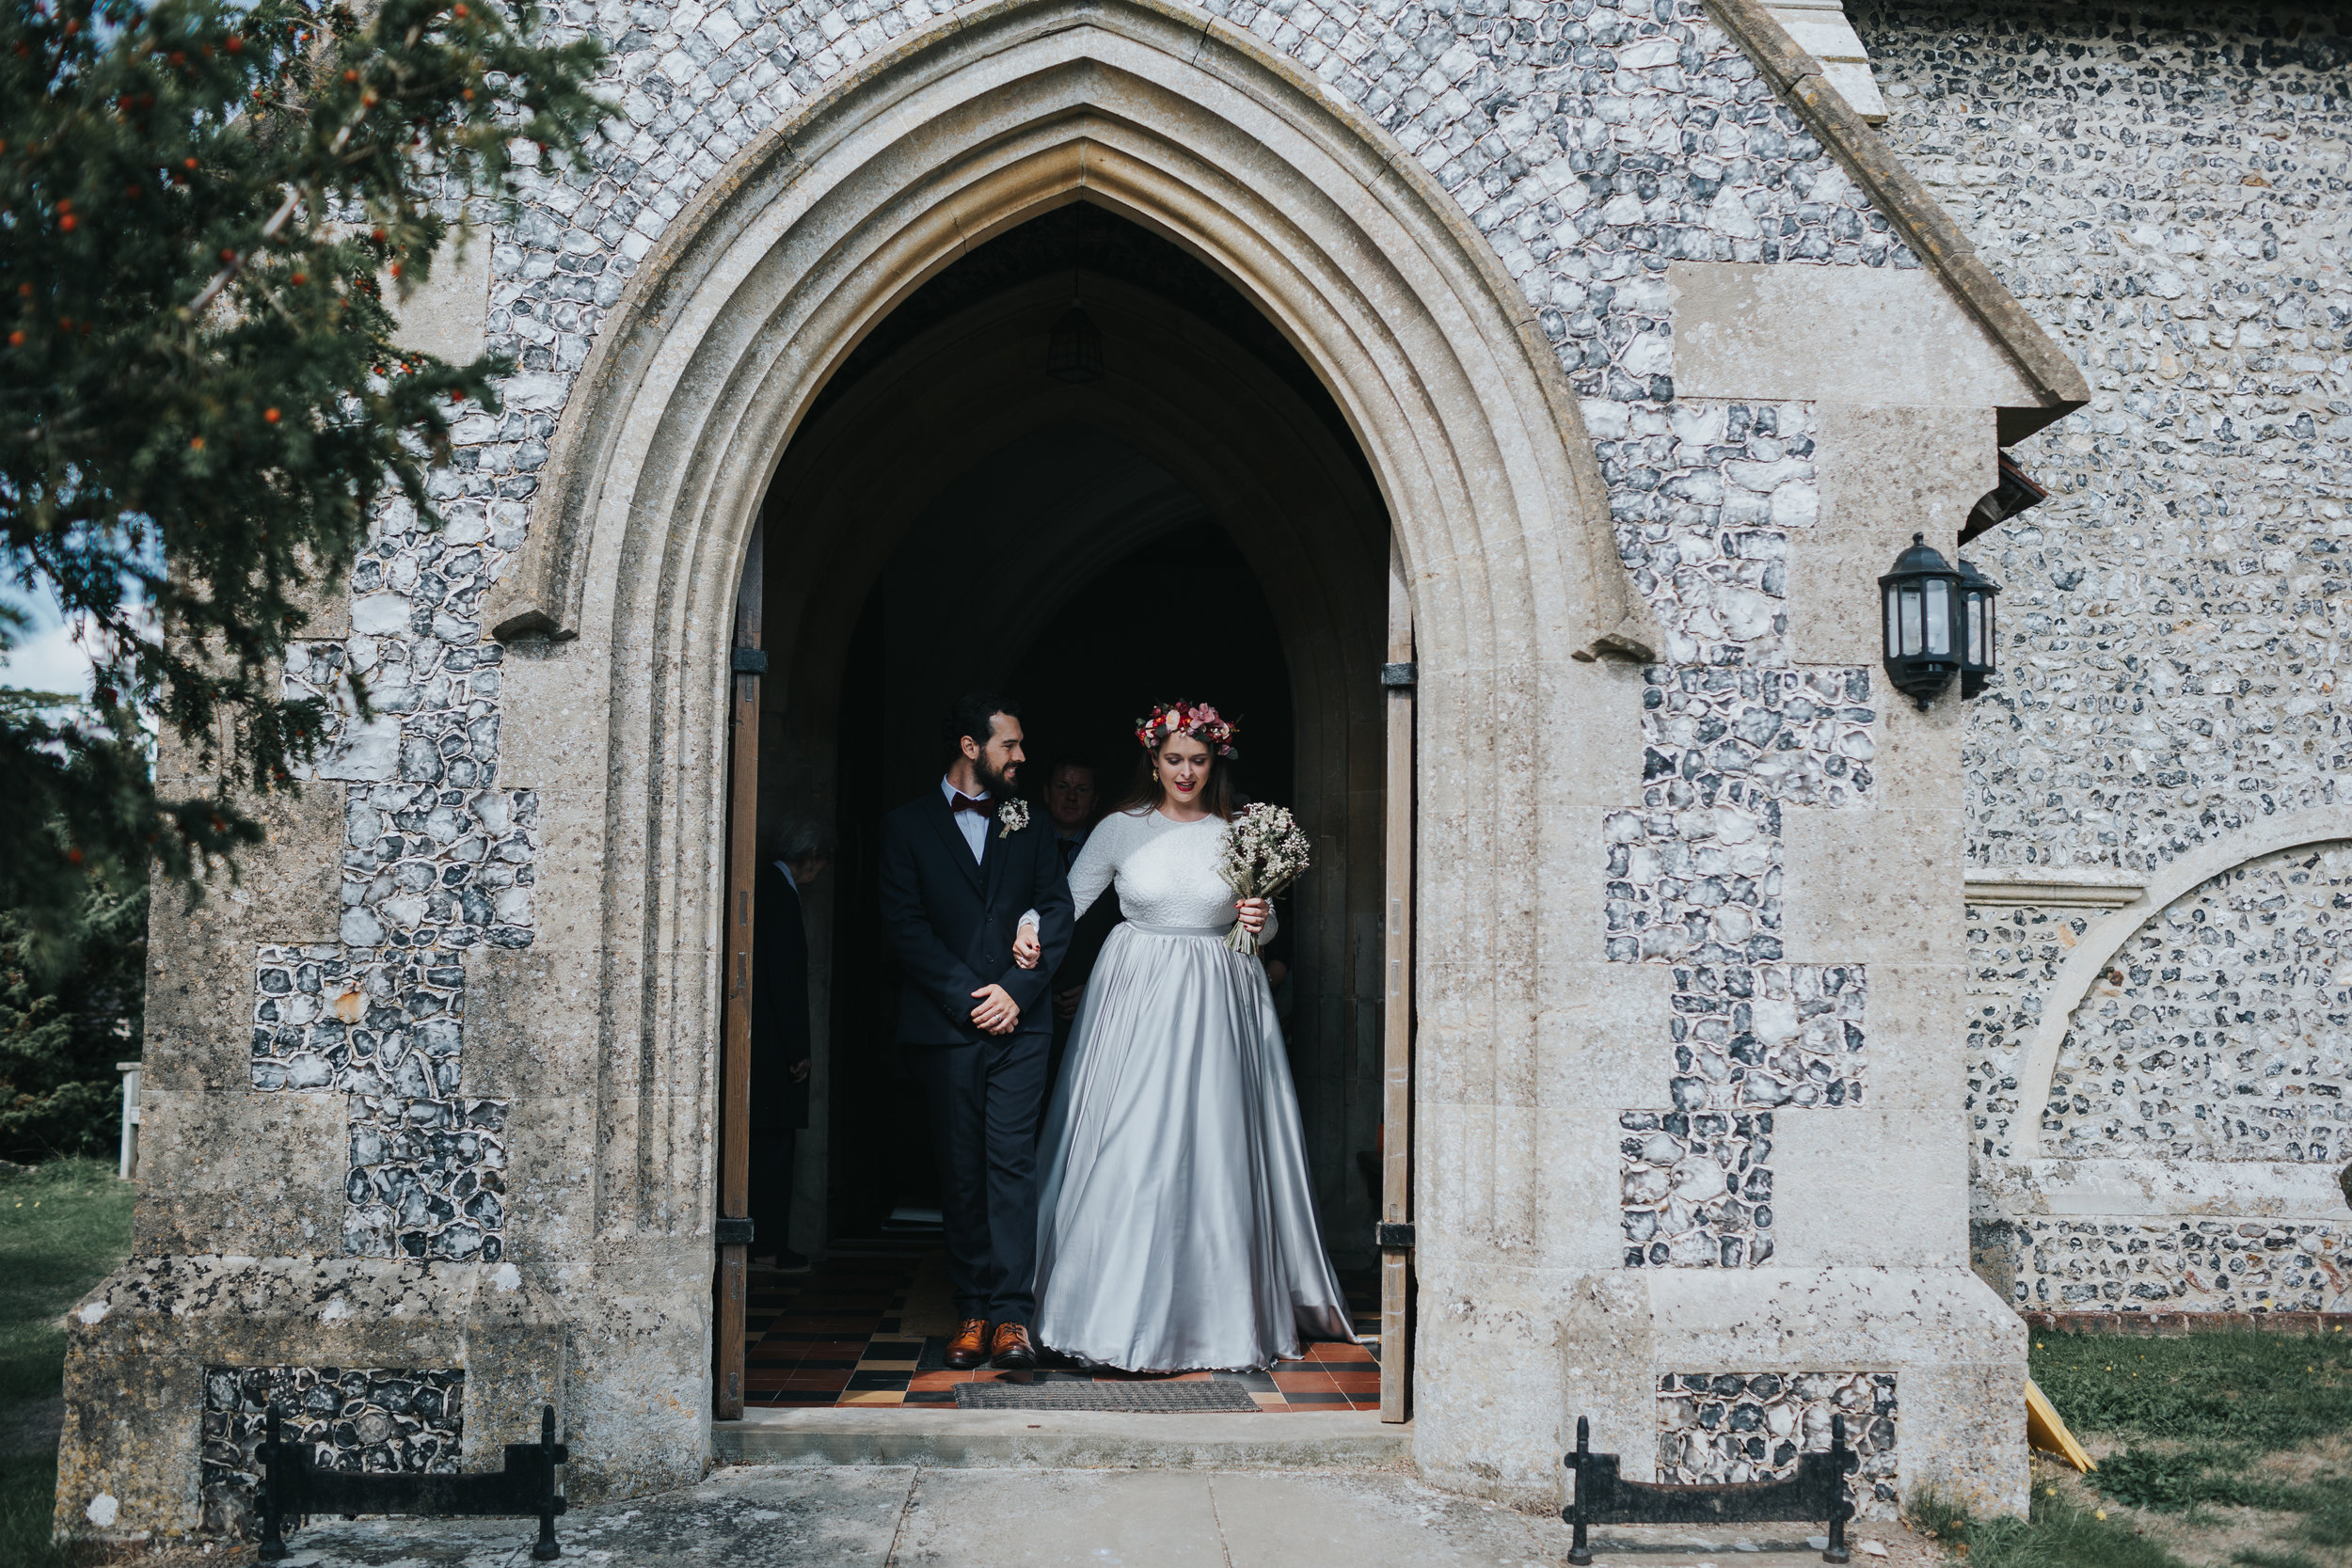 Bride and Groom leaving St Mary's Church, Aldworth together as a married couple.  